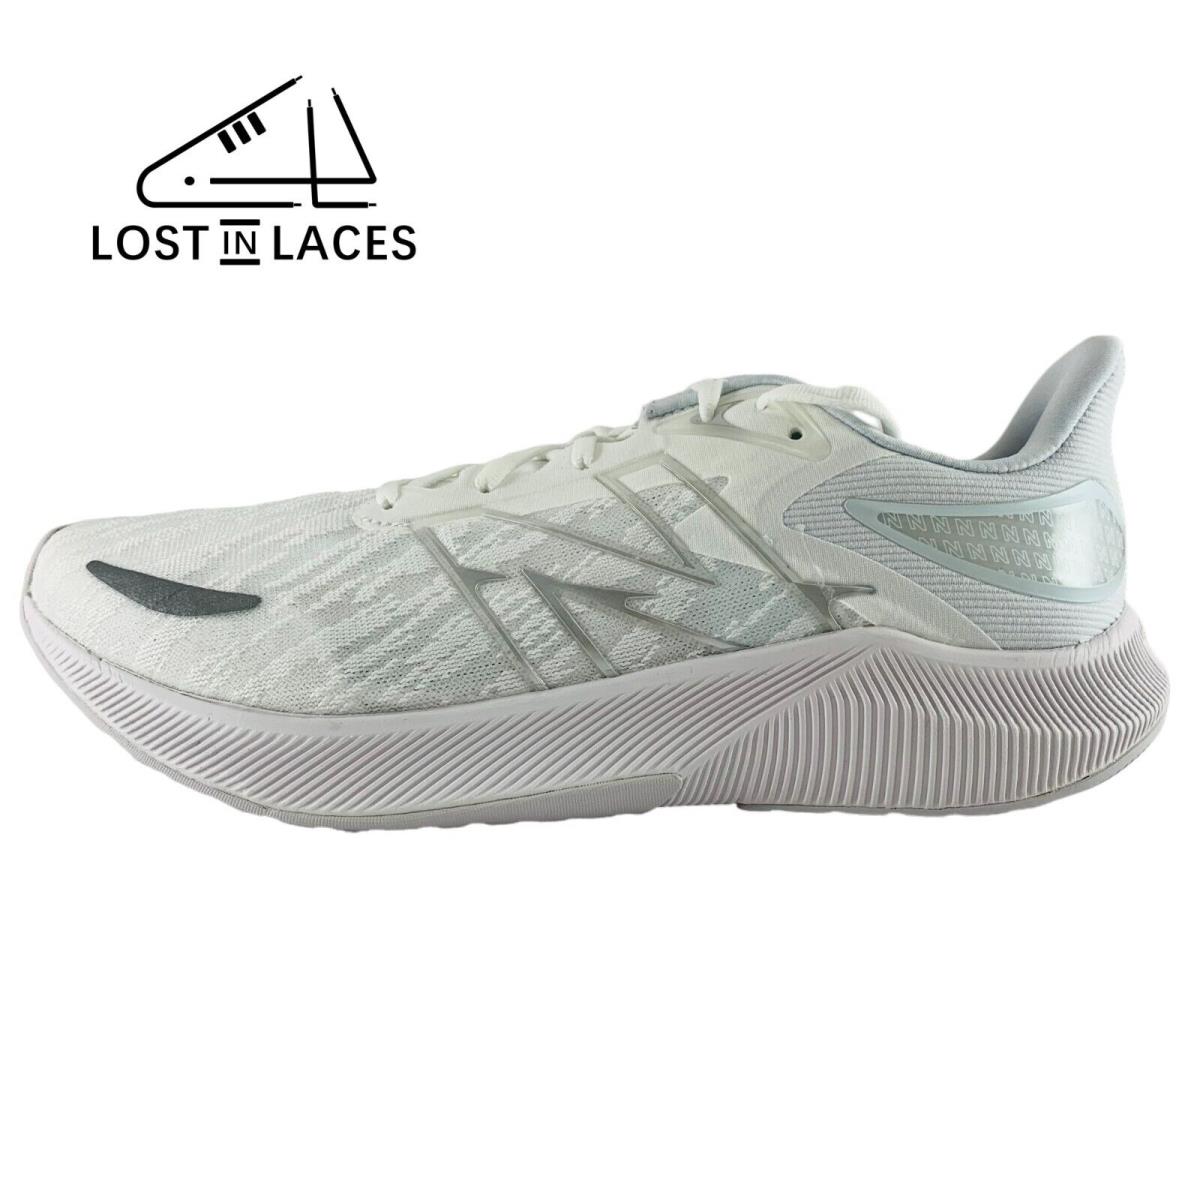 New Balance Fuelcell Propel v3 White Silver New Men`s Running Shoes MFCPRLW3 - White